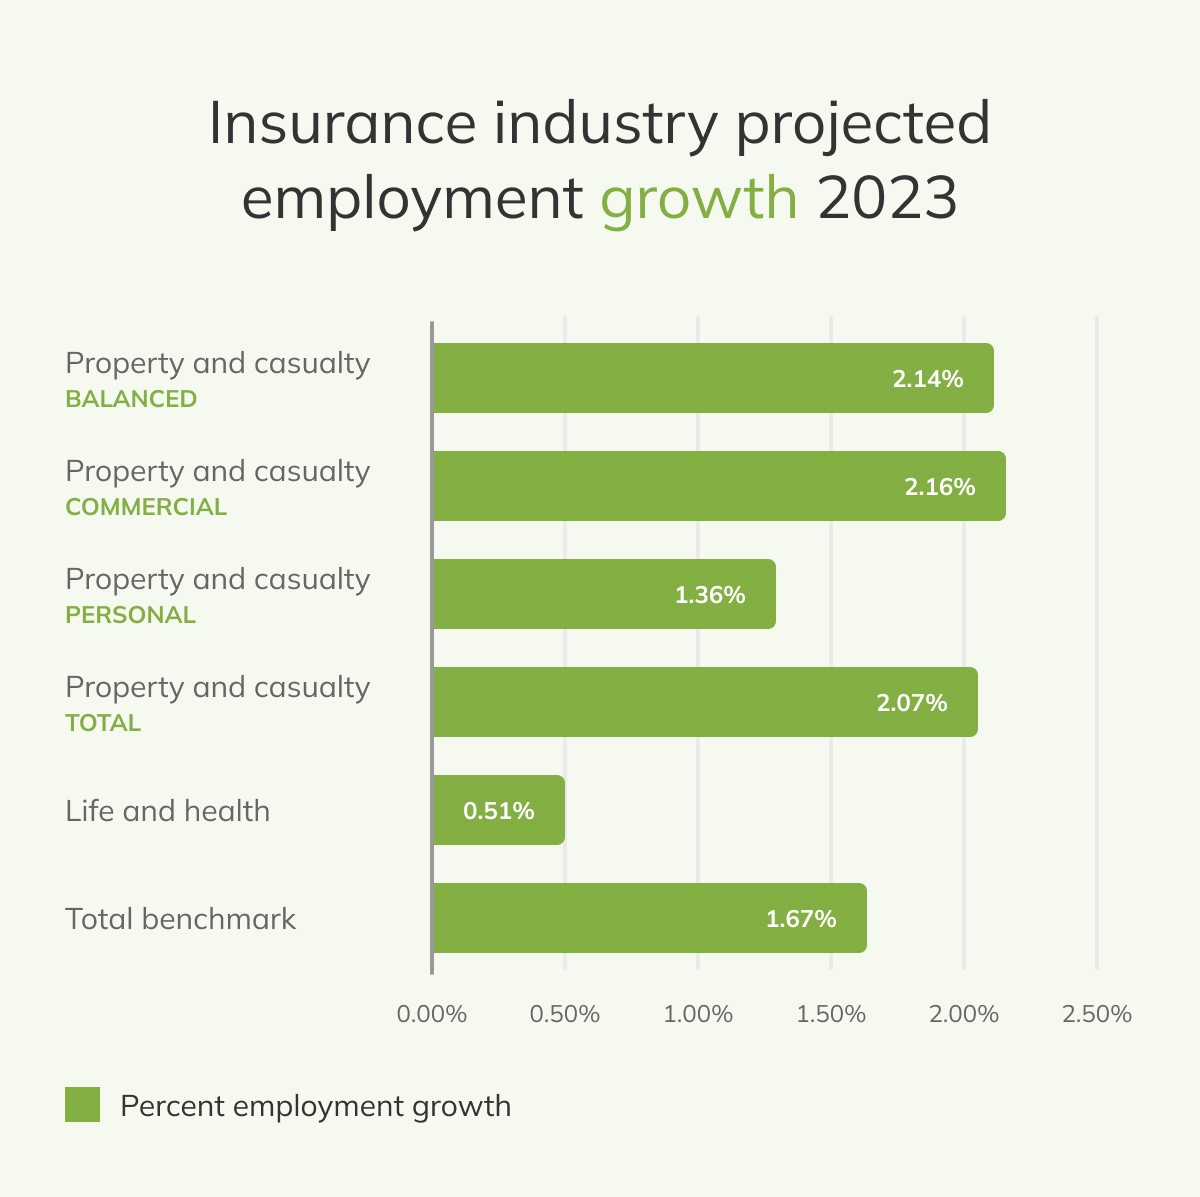 Insurance sector expected growth 2023